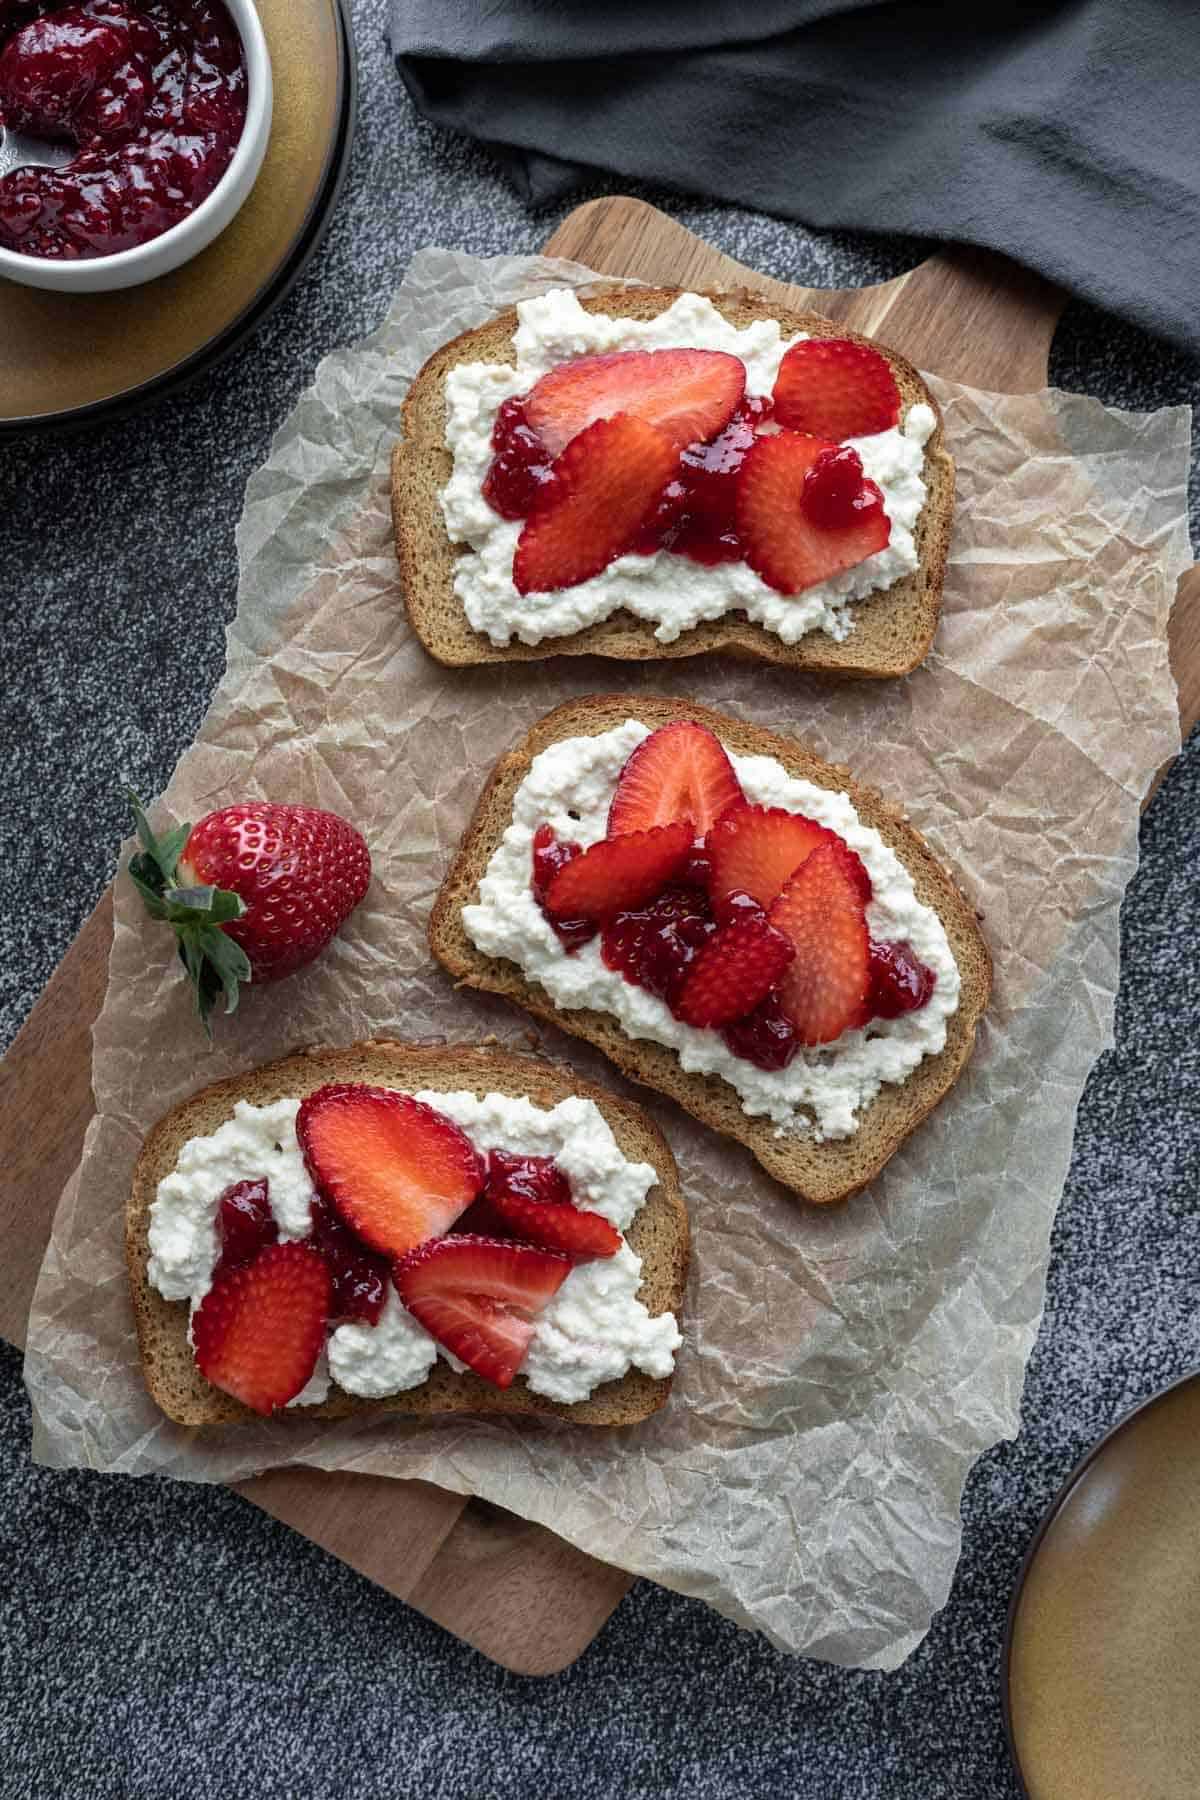 A cutting board covered with wax paper displaying three slices of bread topped with vegan cottage cheese and berries.